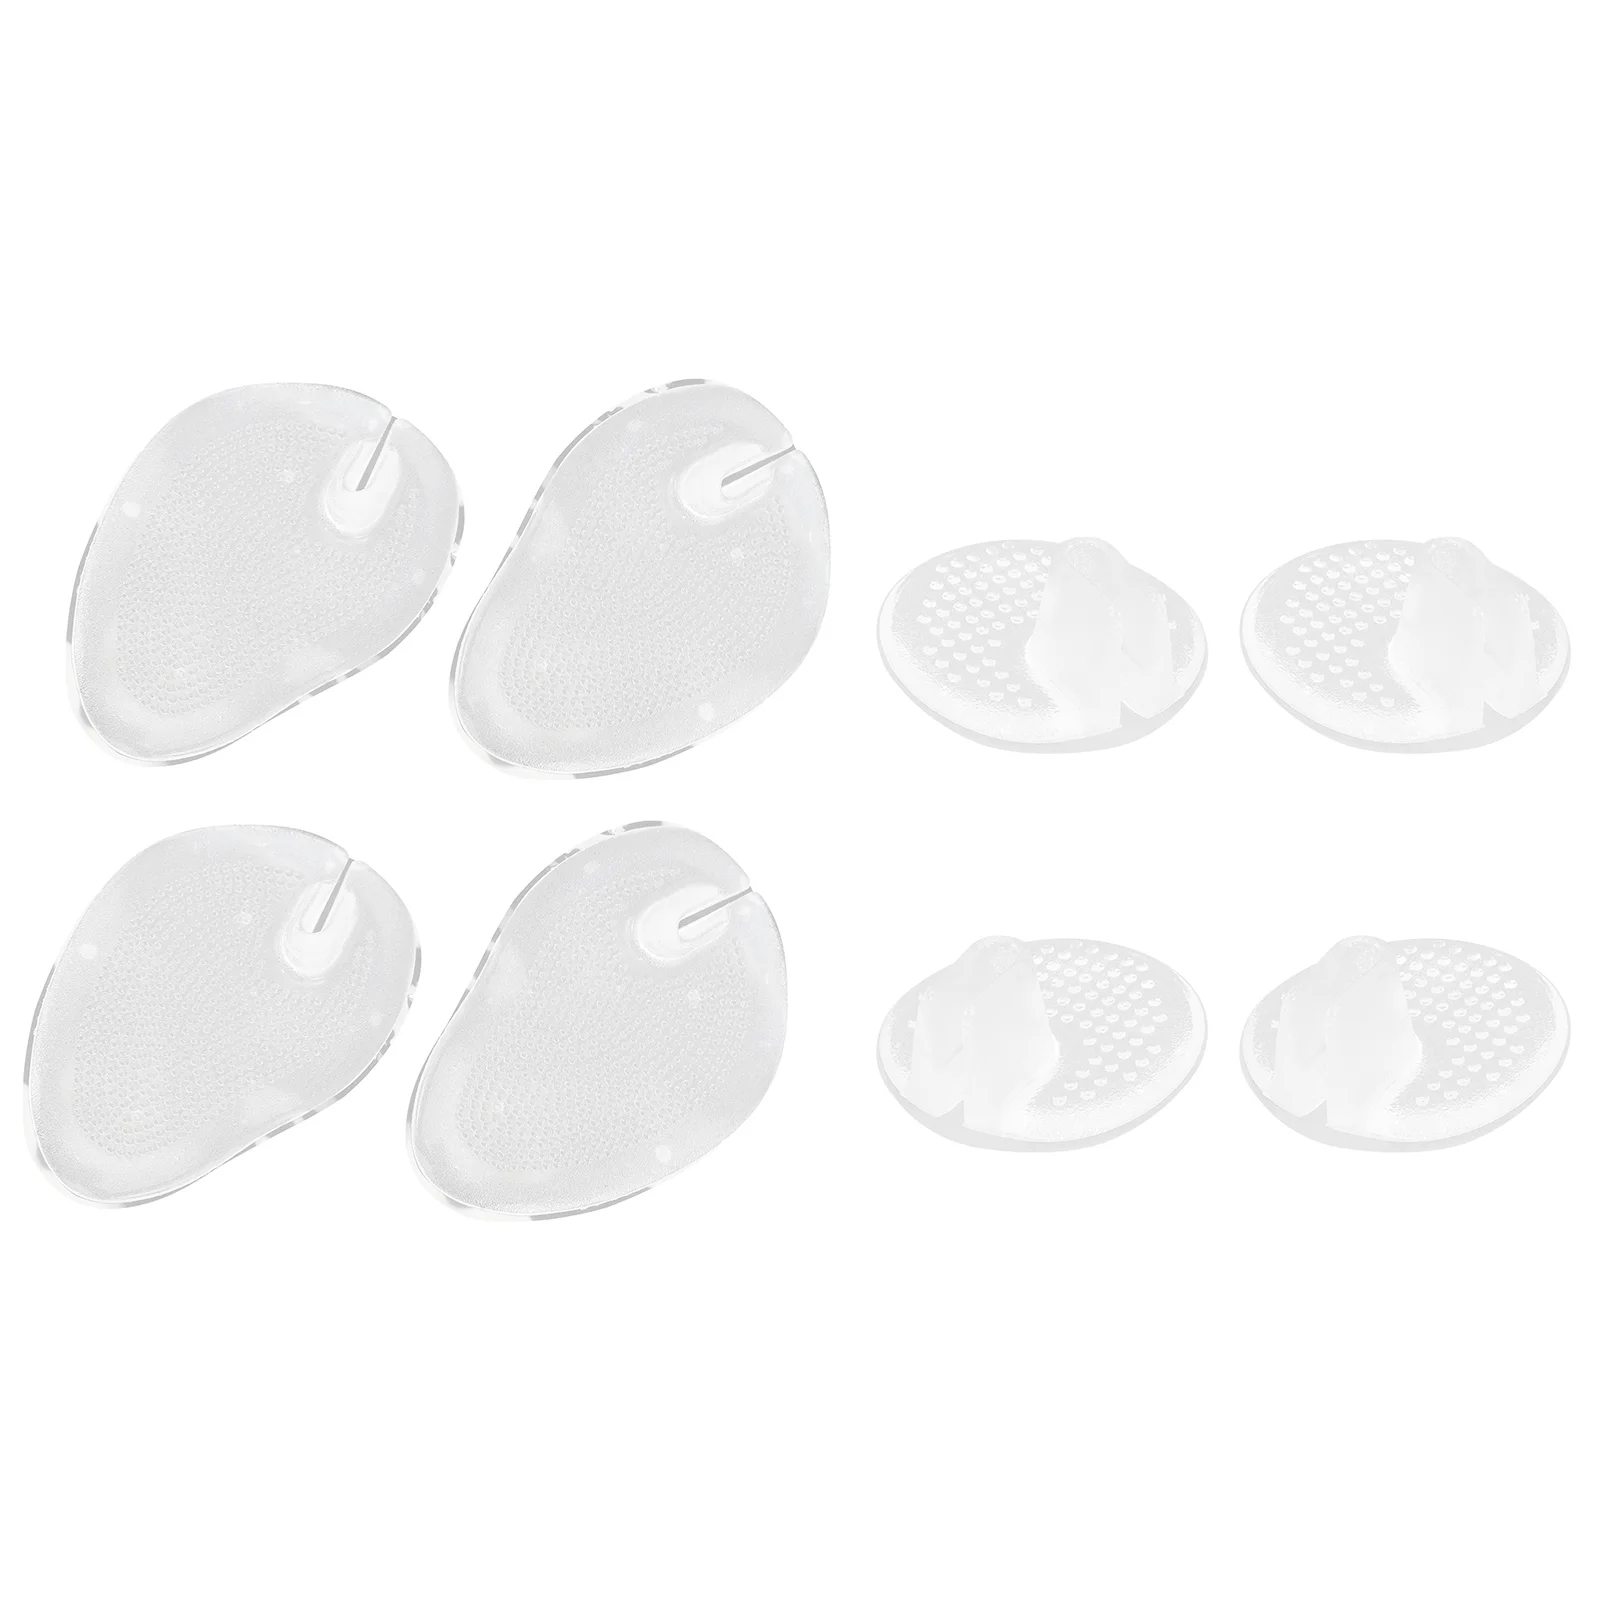 4 Pairs Thong Sandal Clear Thong Sandal Thong Sandal Toe Pads Silicone Forefoot Cushions Clear Toe Grip Pads 2000pcs 7 7x10cm aluminum foil clear plastic bag zipper grip seal beans candy packaging bag heat sealable mylar pouches